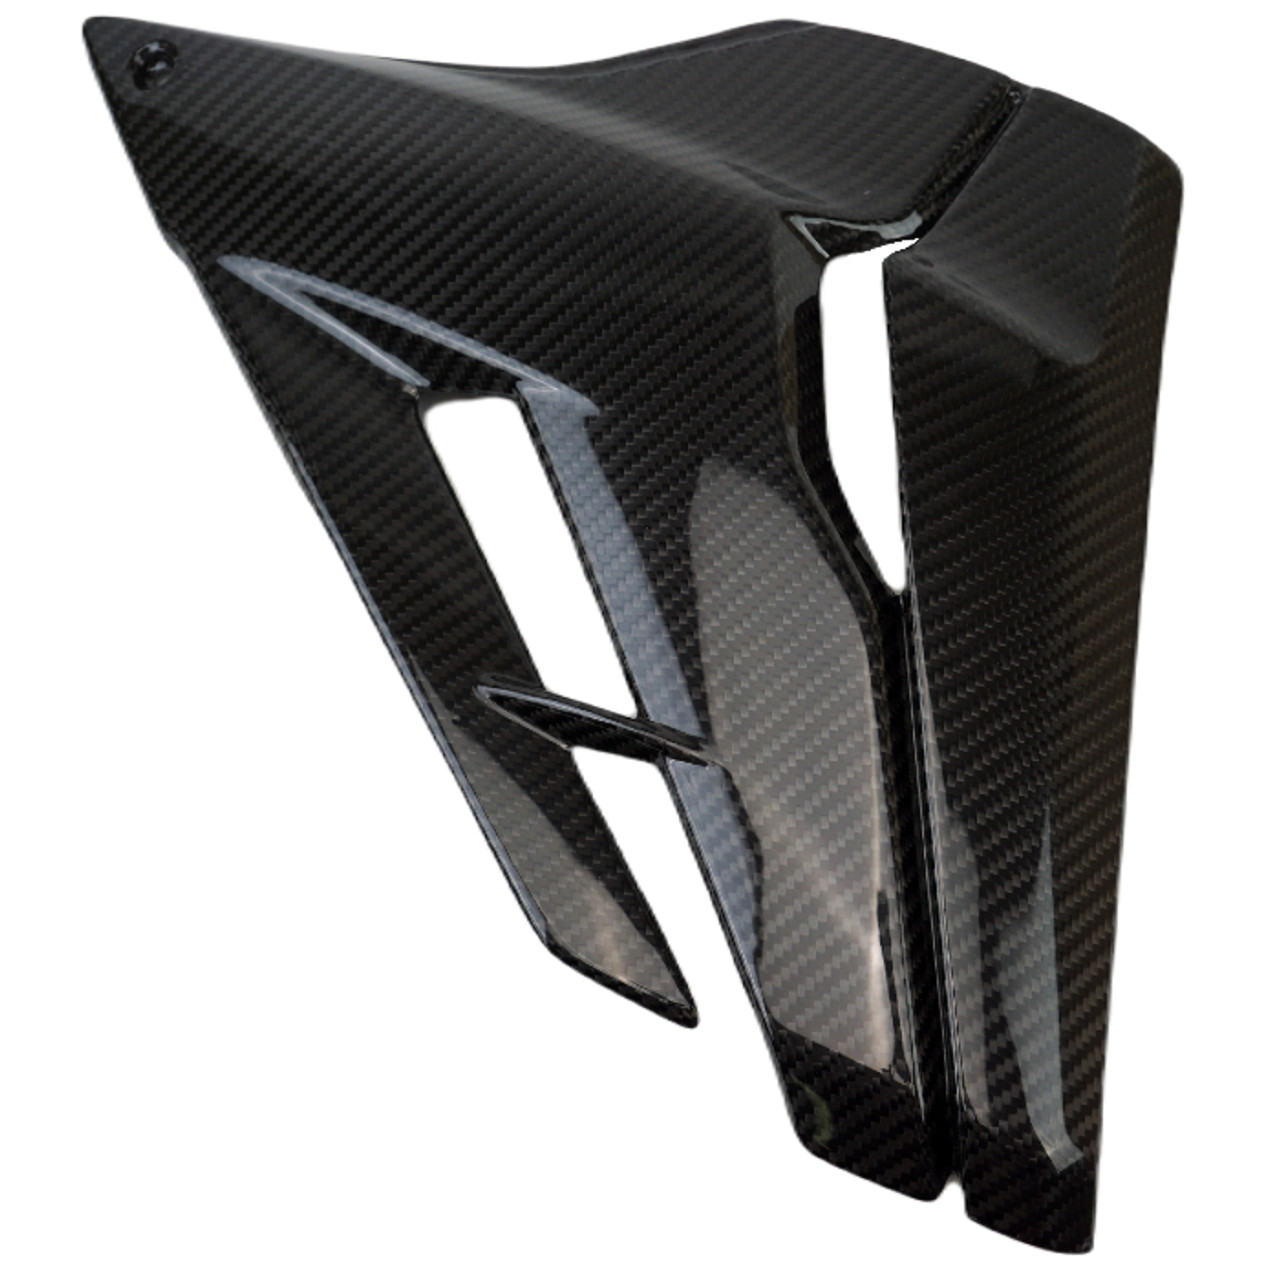 Belly Pan Cowlings in Glossy Twill Weave Carbon Fiber for Ducati Streetfighter V2